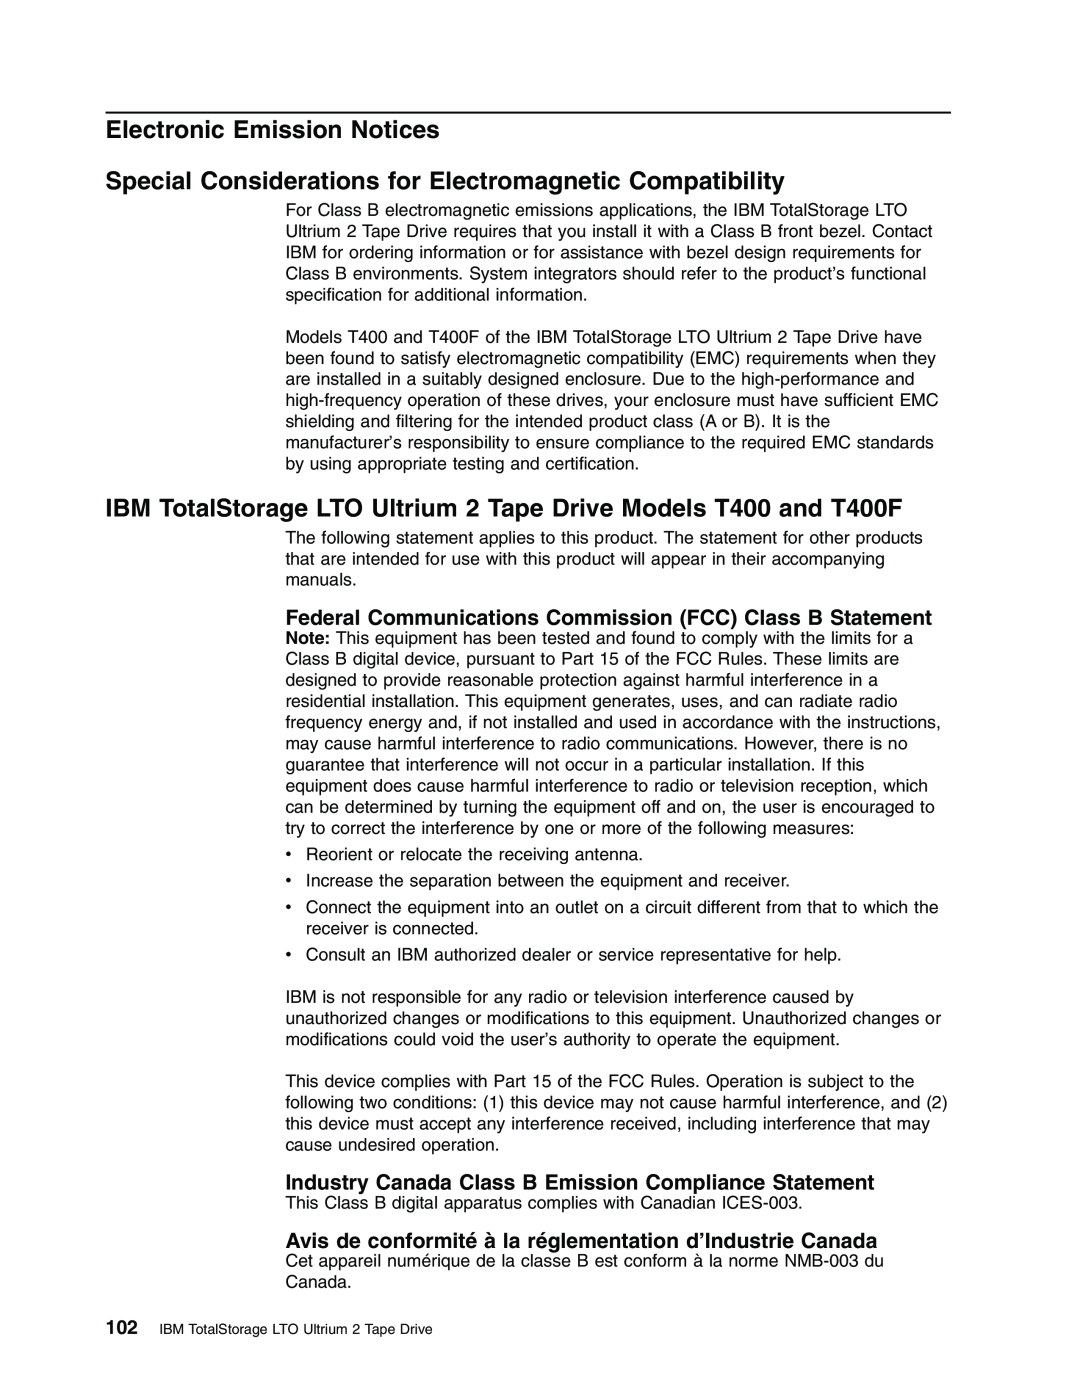 IBM T400F manual Electronic Emission Notices, Special Considerations for Electromagnetic Compatibility 